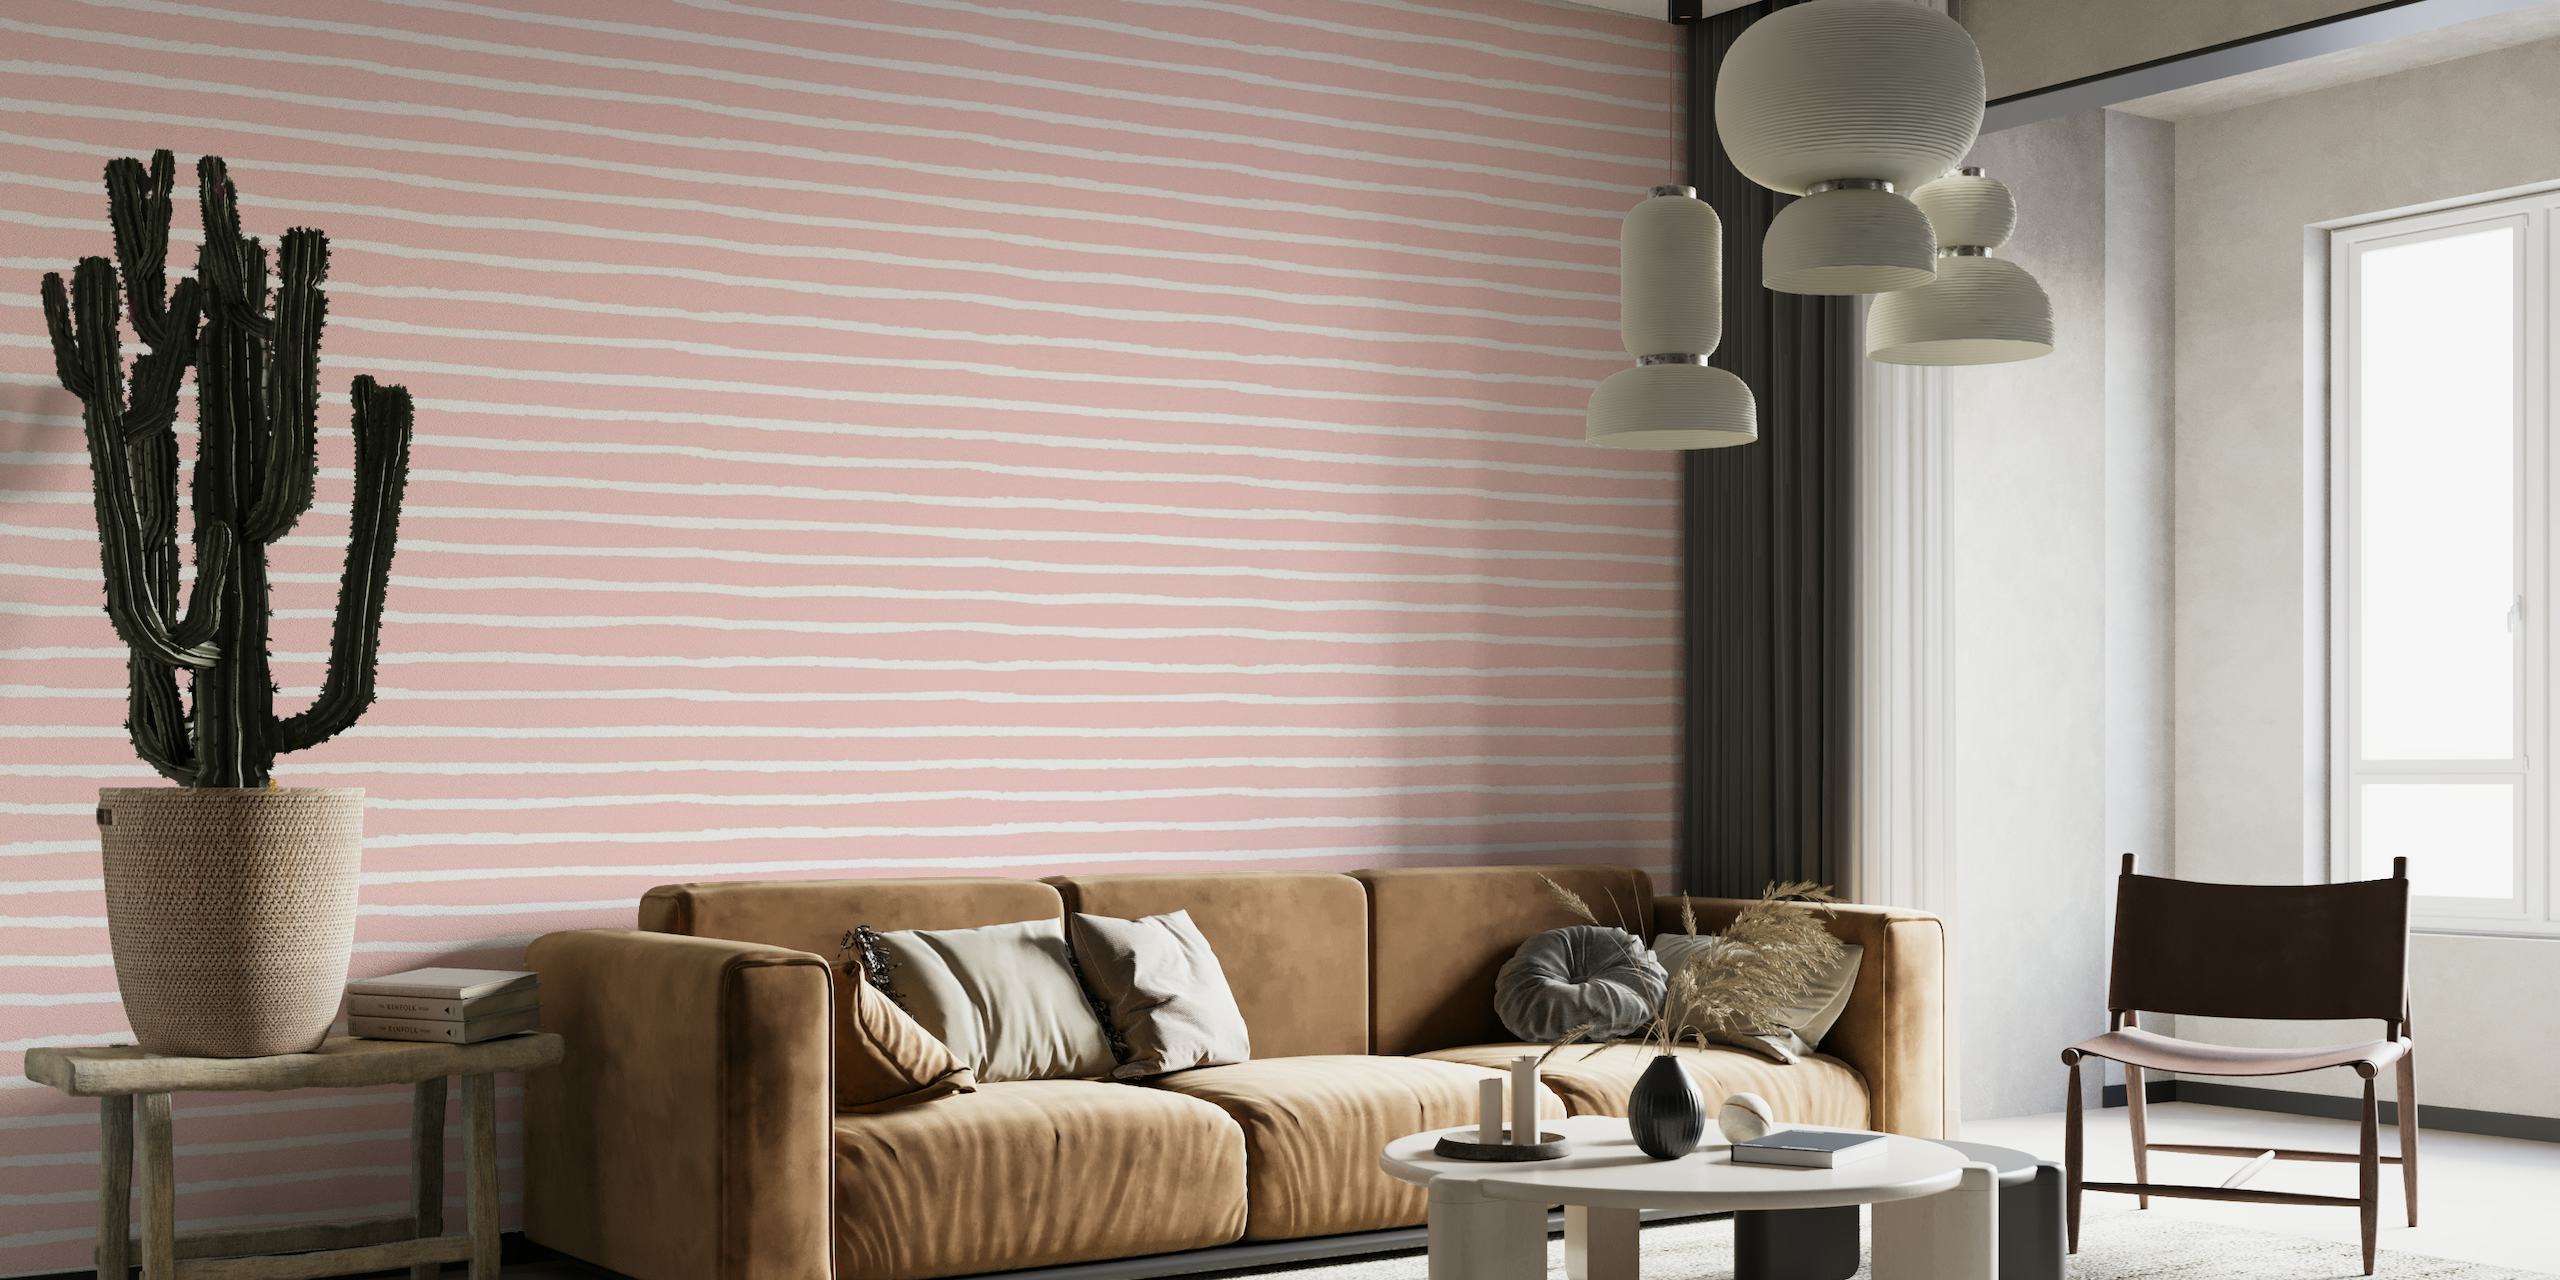 Abstract Stripes_pink papiers peint